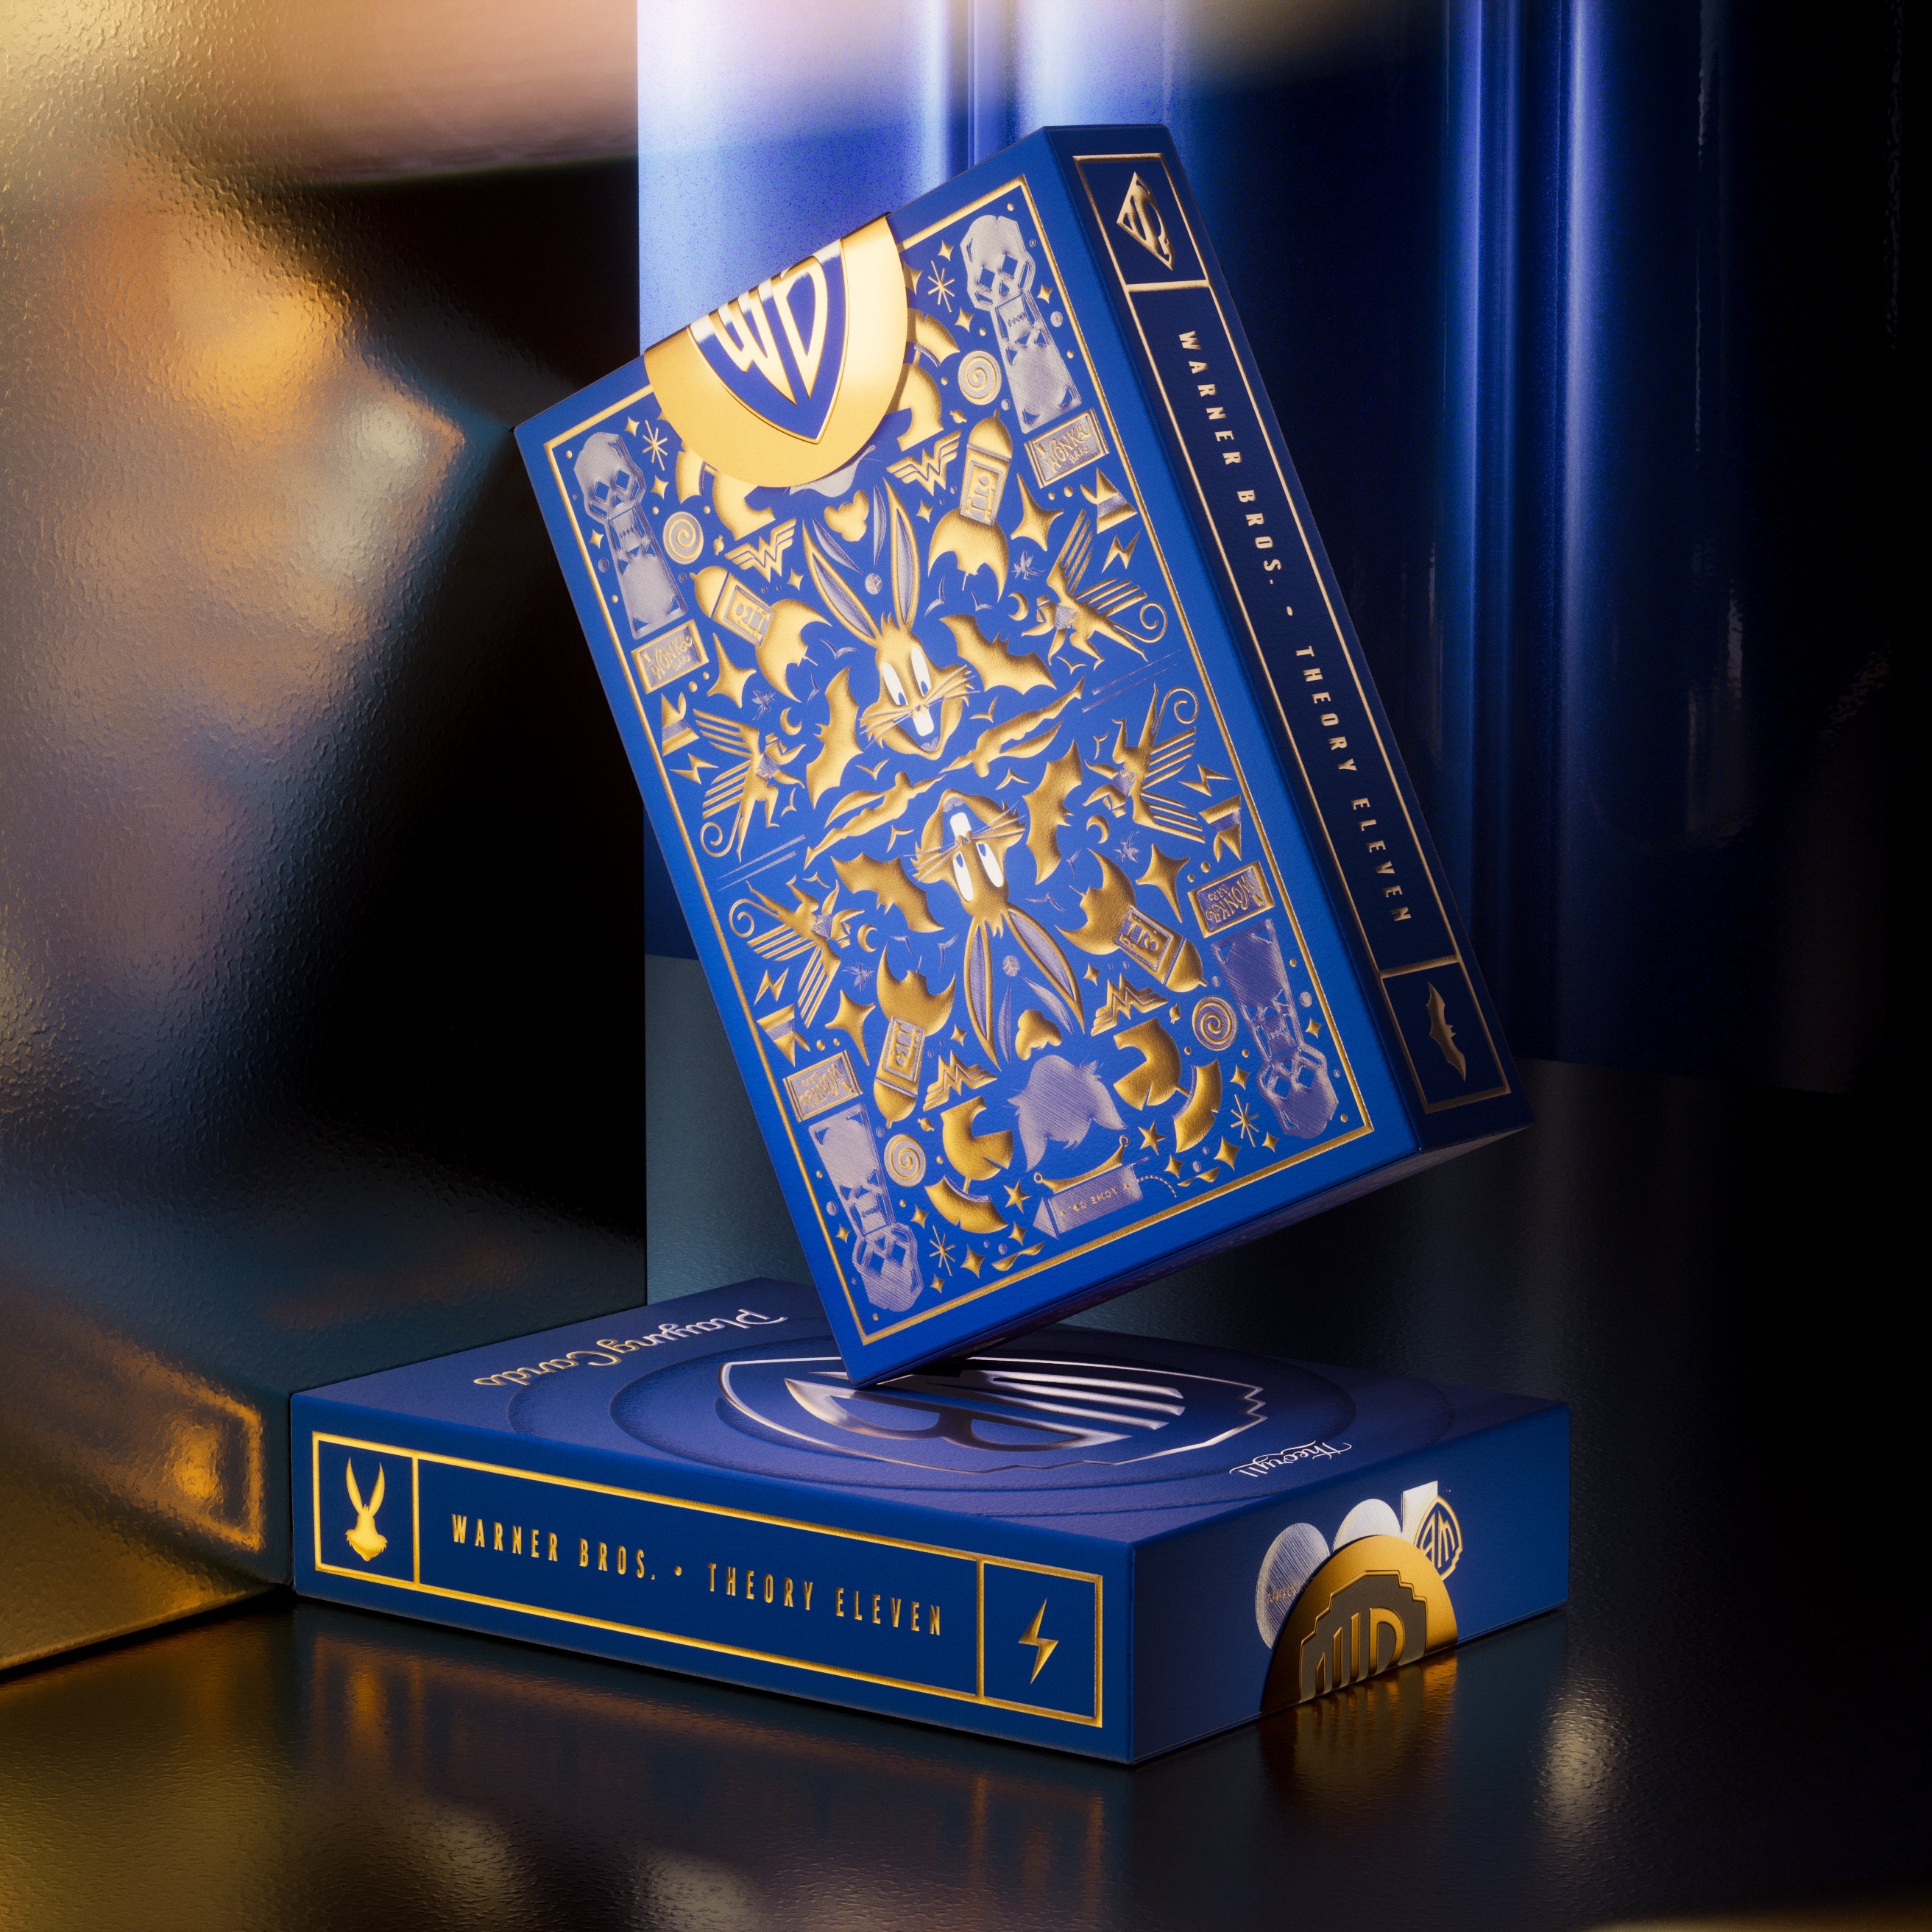 Warner Bros. 100th Anniversary Playing Cards